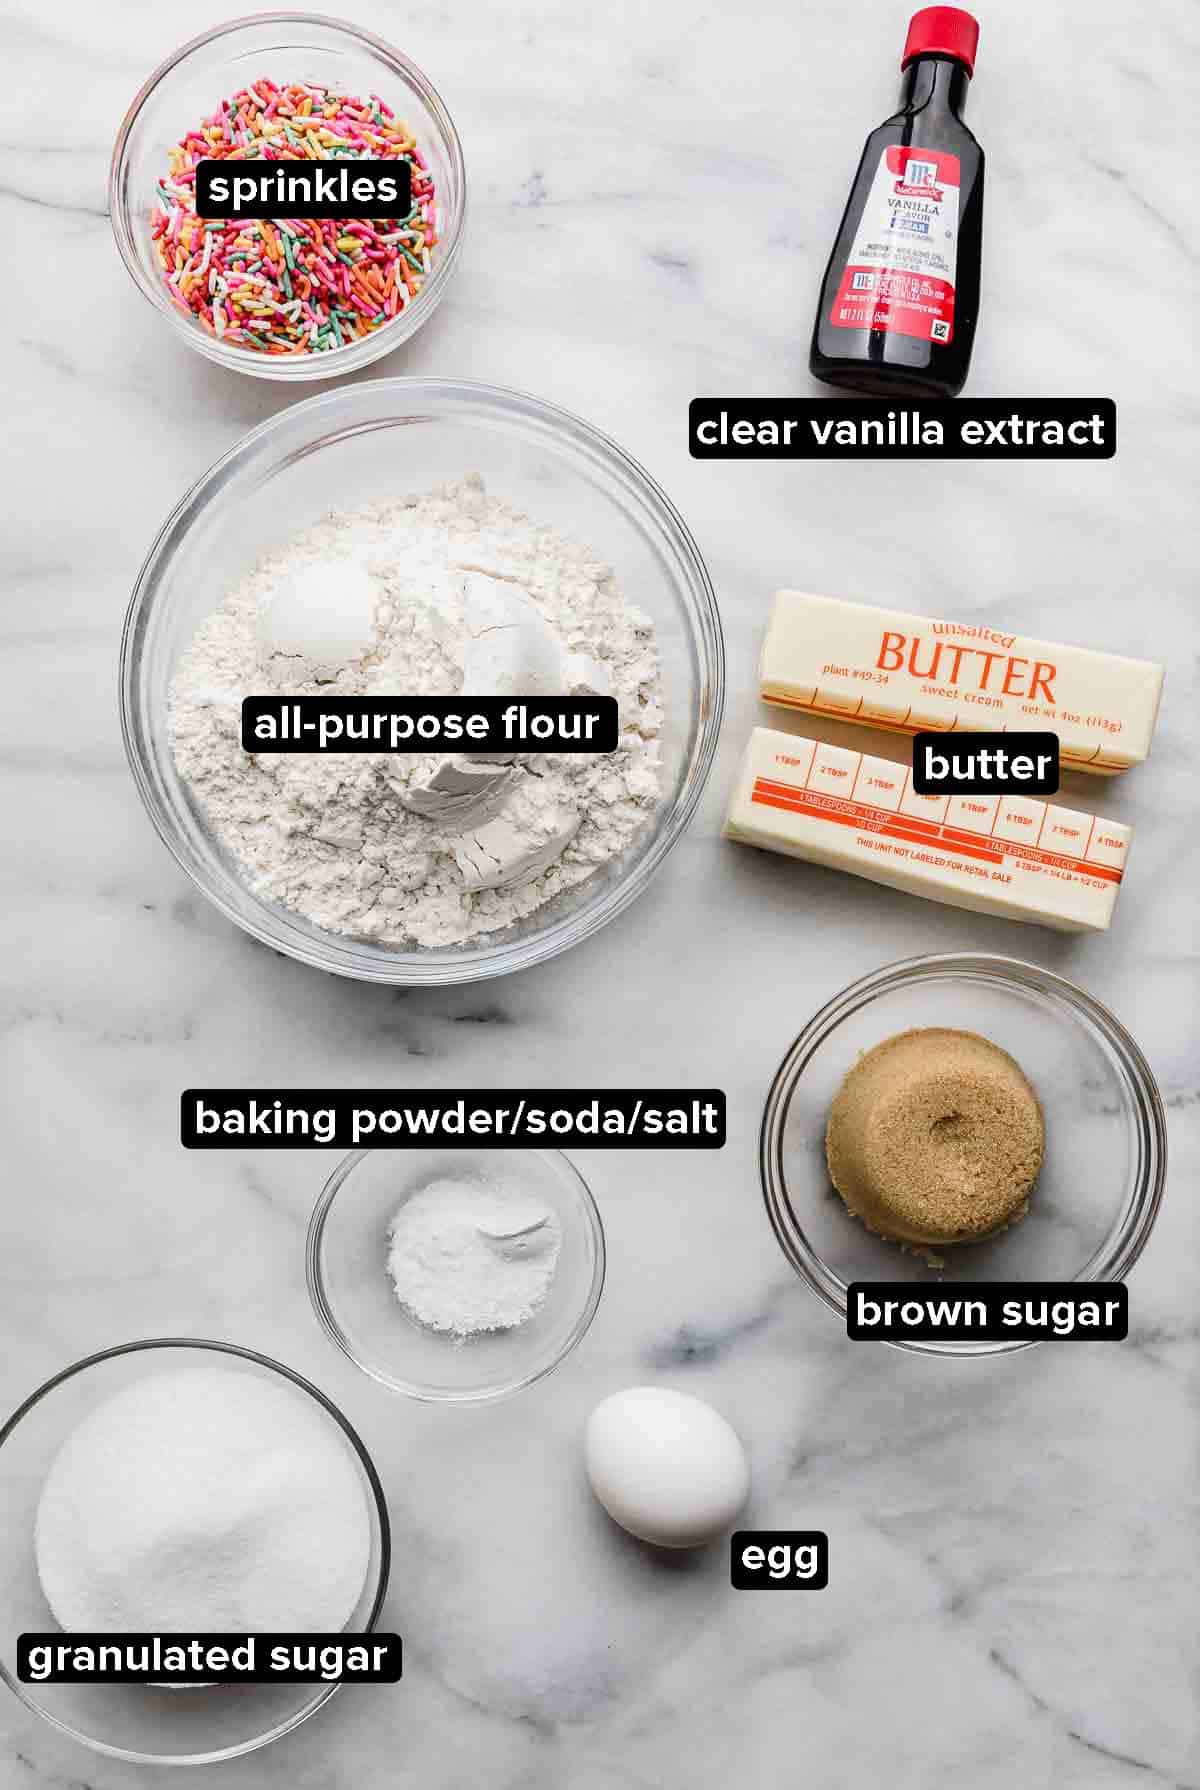 Funfetti Cookie ingredients portioned into glass bowls on a white background: clear vanilla extract, sprinkles, flour, sugar and brown sugar, butter, egg, and leavening agent.